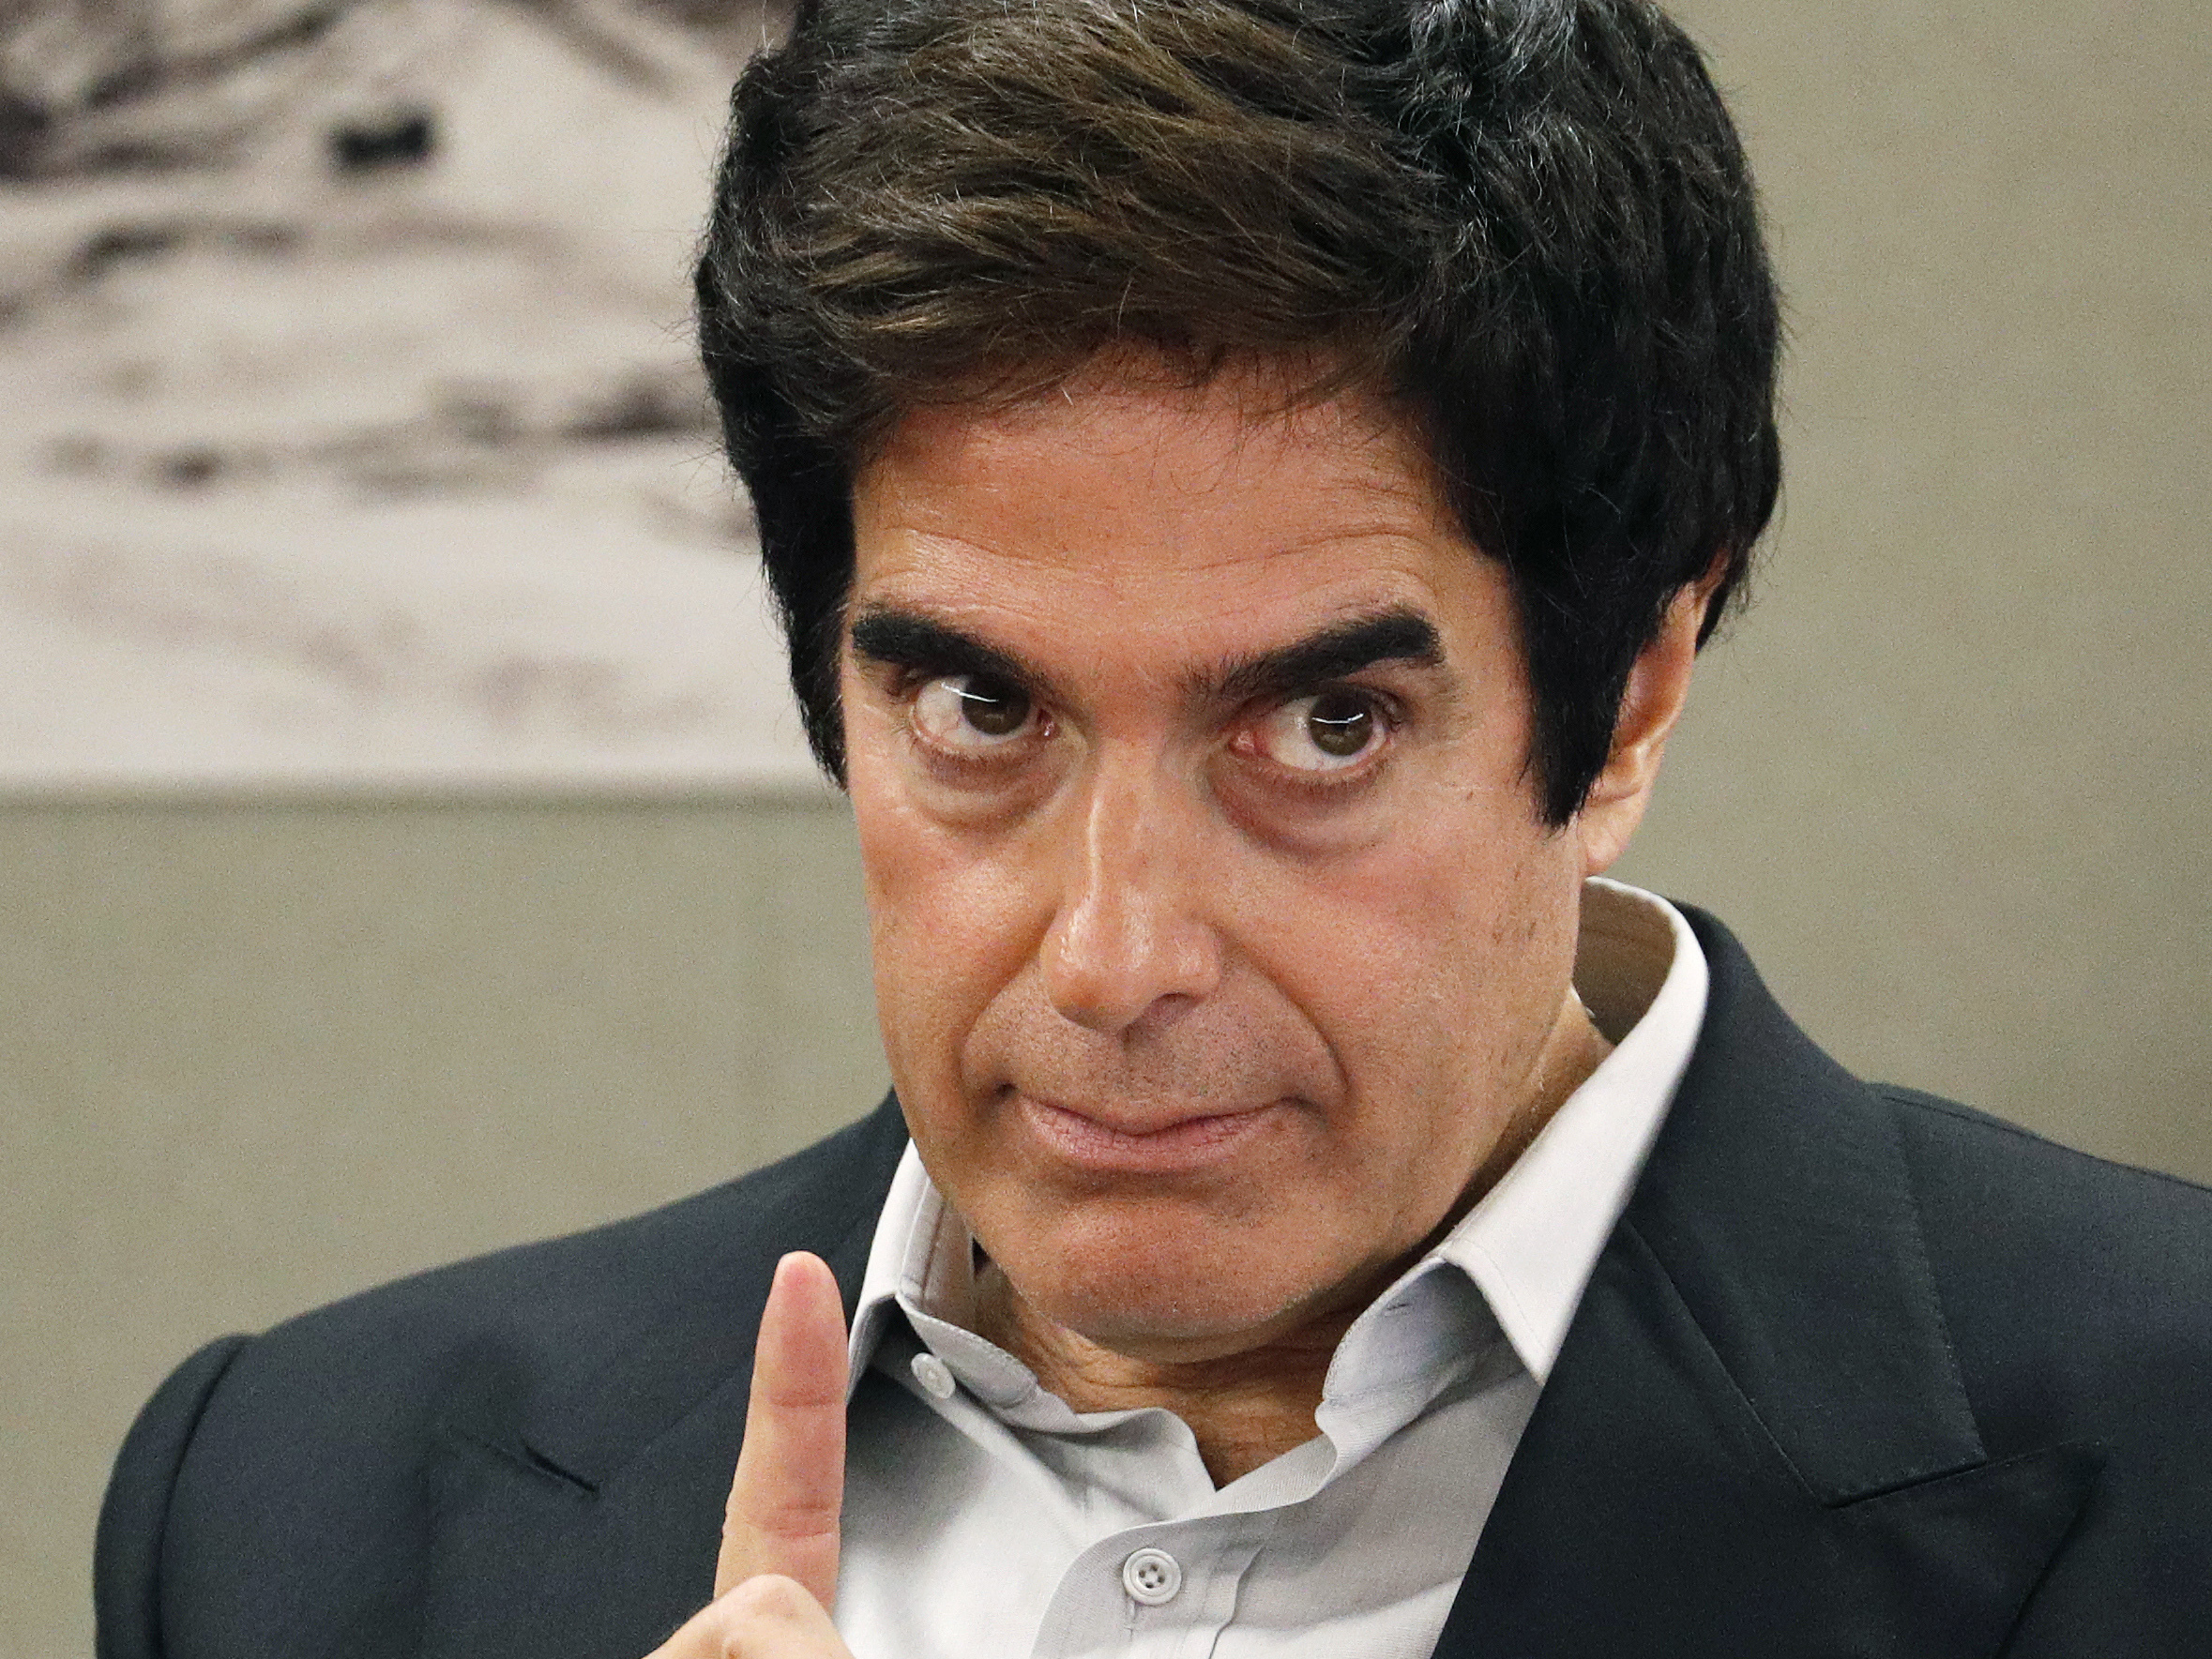 David Copperfield - Most Popular Magicians in the World